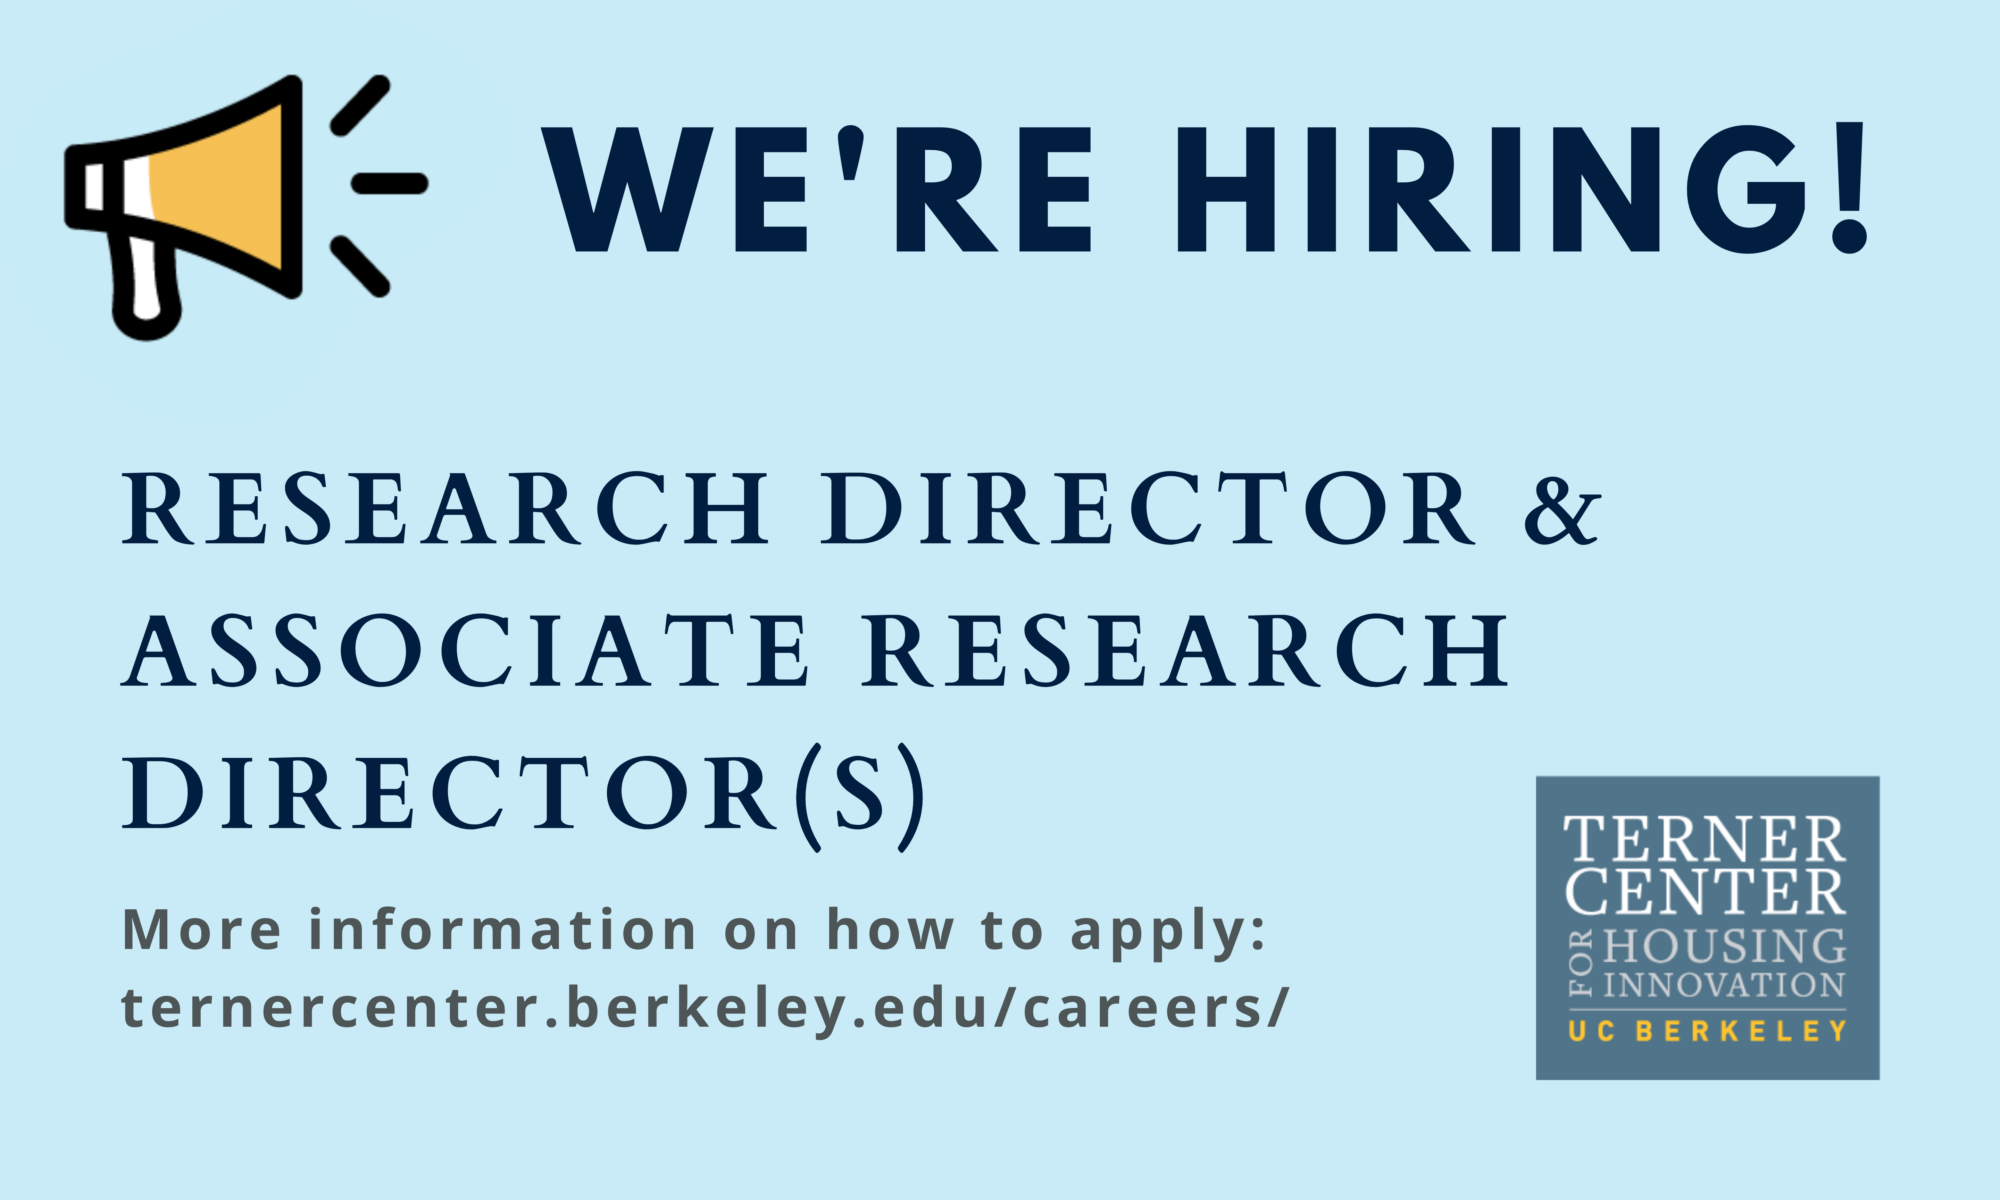 Text: We're hiring! Research Director & Associate Research Director(s). More information on how to apply: ternercenter.berkeley.edu/careers/. Terner Center Logo